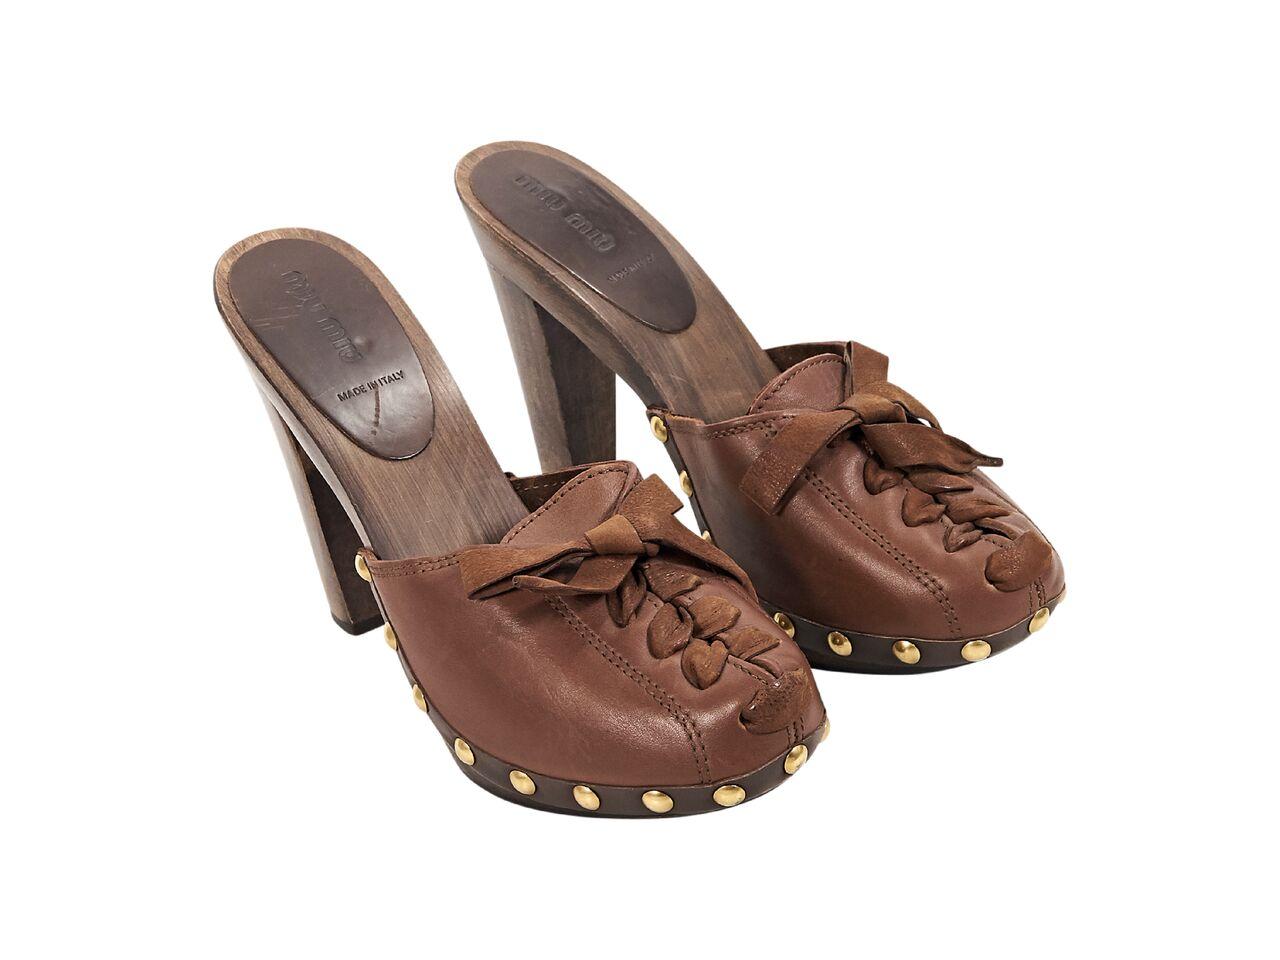 Product details:  Brown leather heeled mules by Miu Miu.  Accented with studs.  Lace-up front panel.  Round toe.  Wooden heel and platform.  Slip-on style.  Goldtone hardware.  5